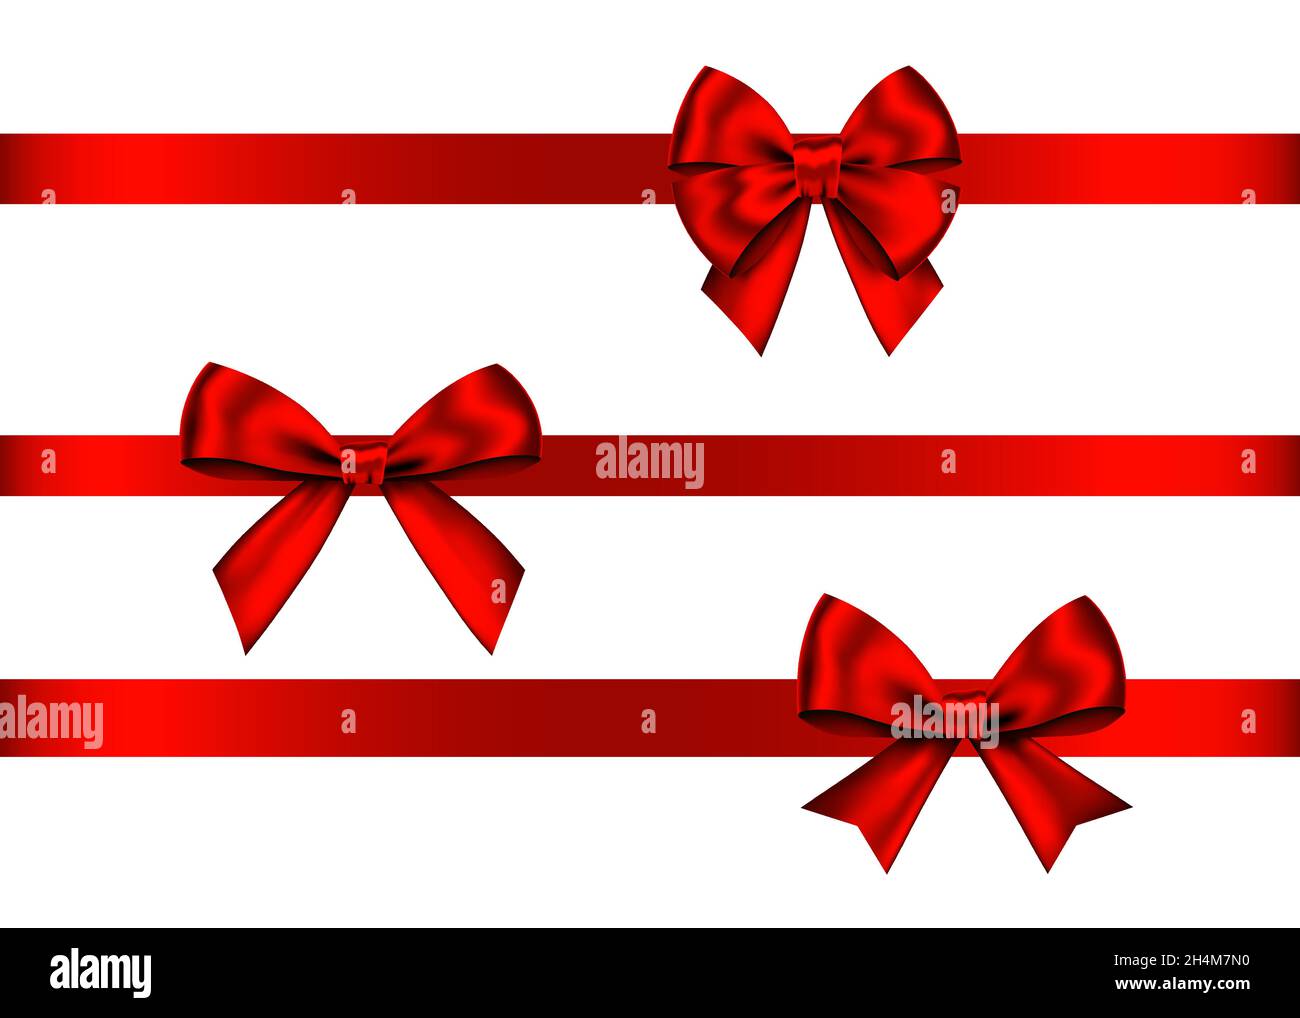 Gift Bows Silk Red Ribbon With Decorative Bow Realistic Luxury